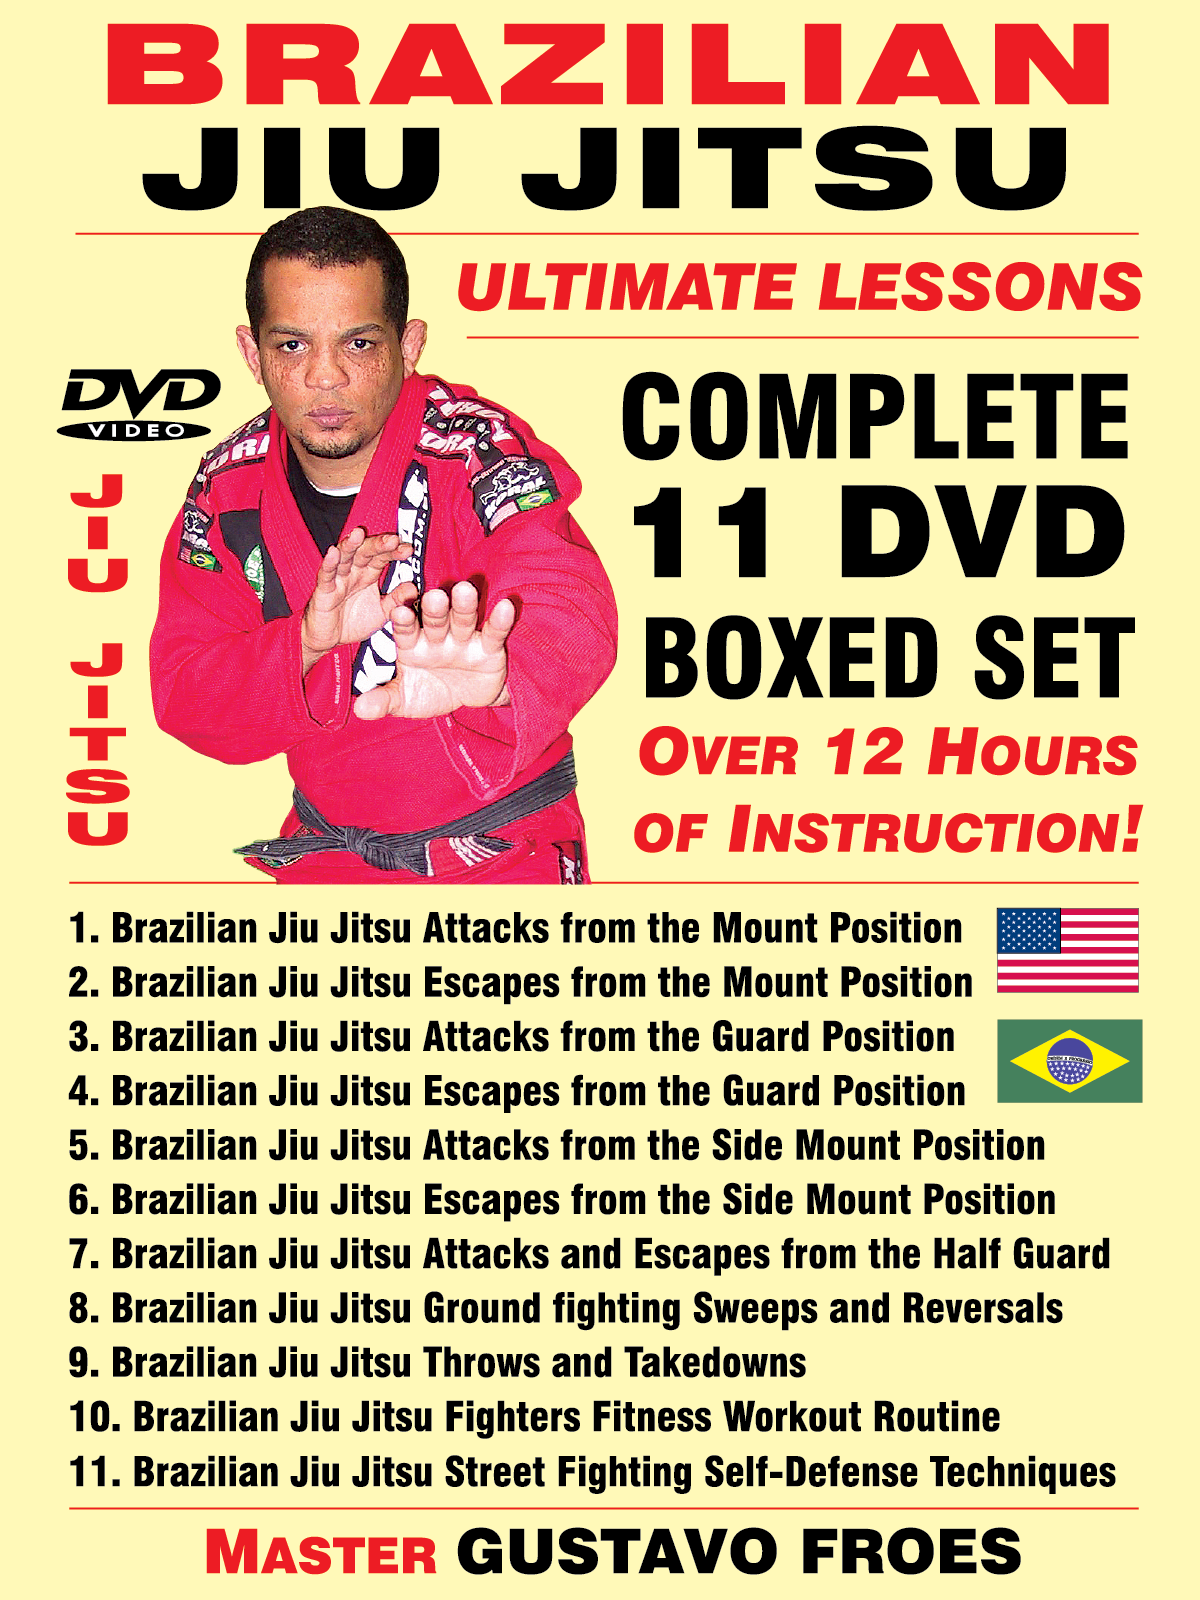 BJJ Ultimate Lessons 11 DVD Set by Gustavo Froes